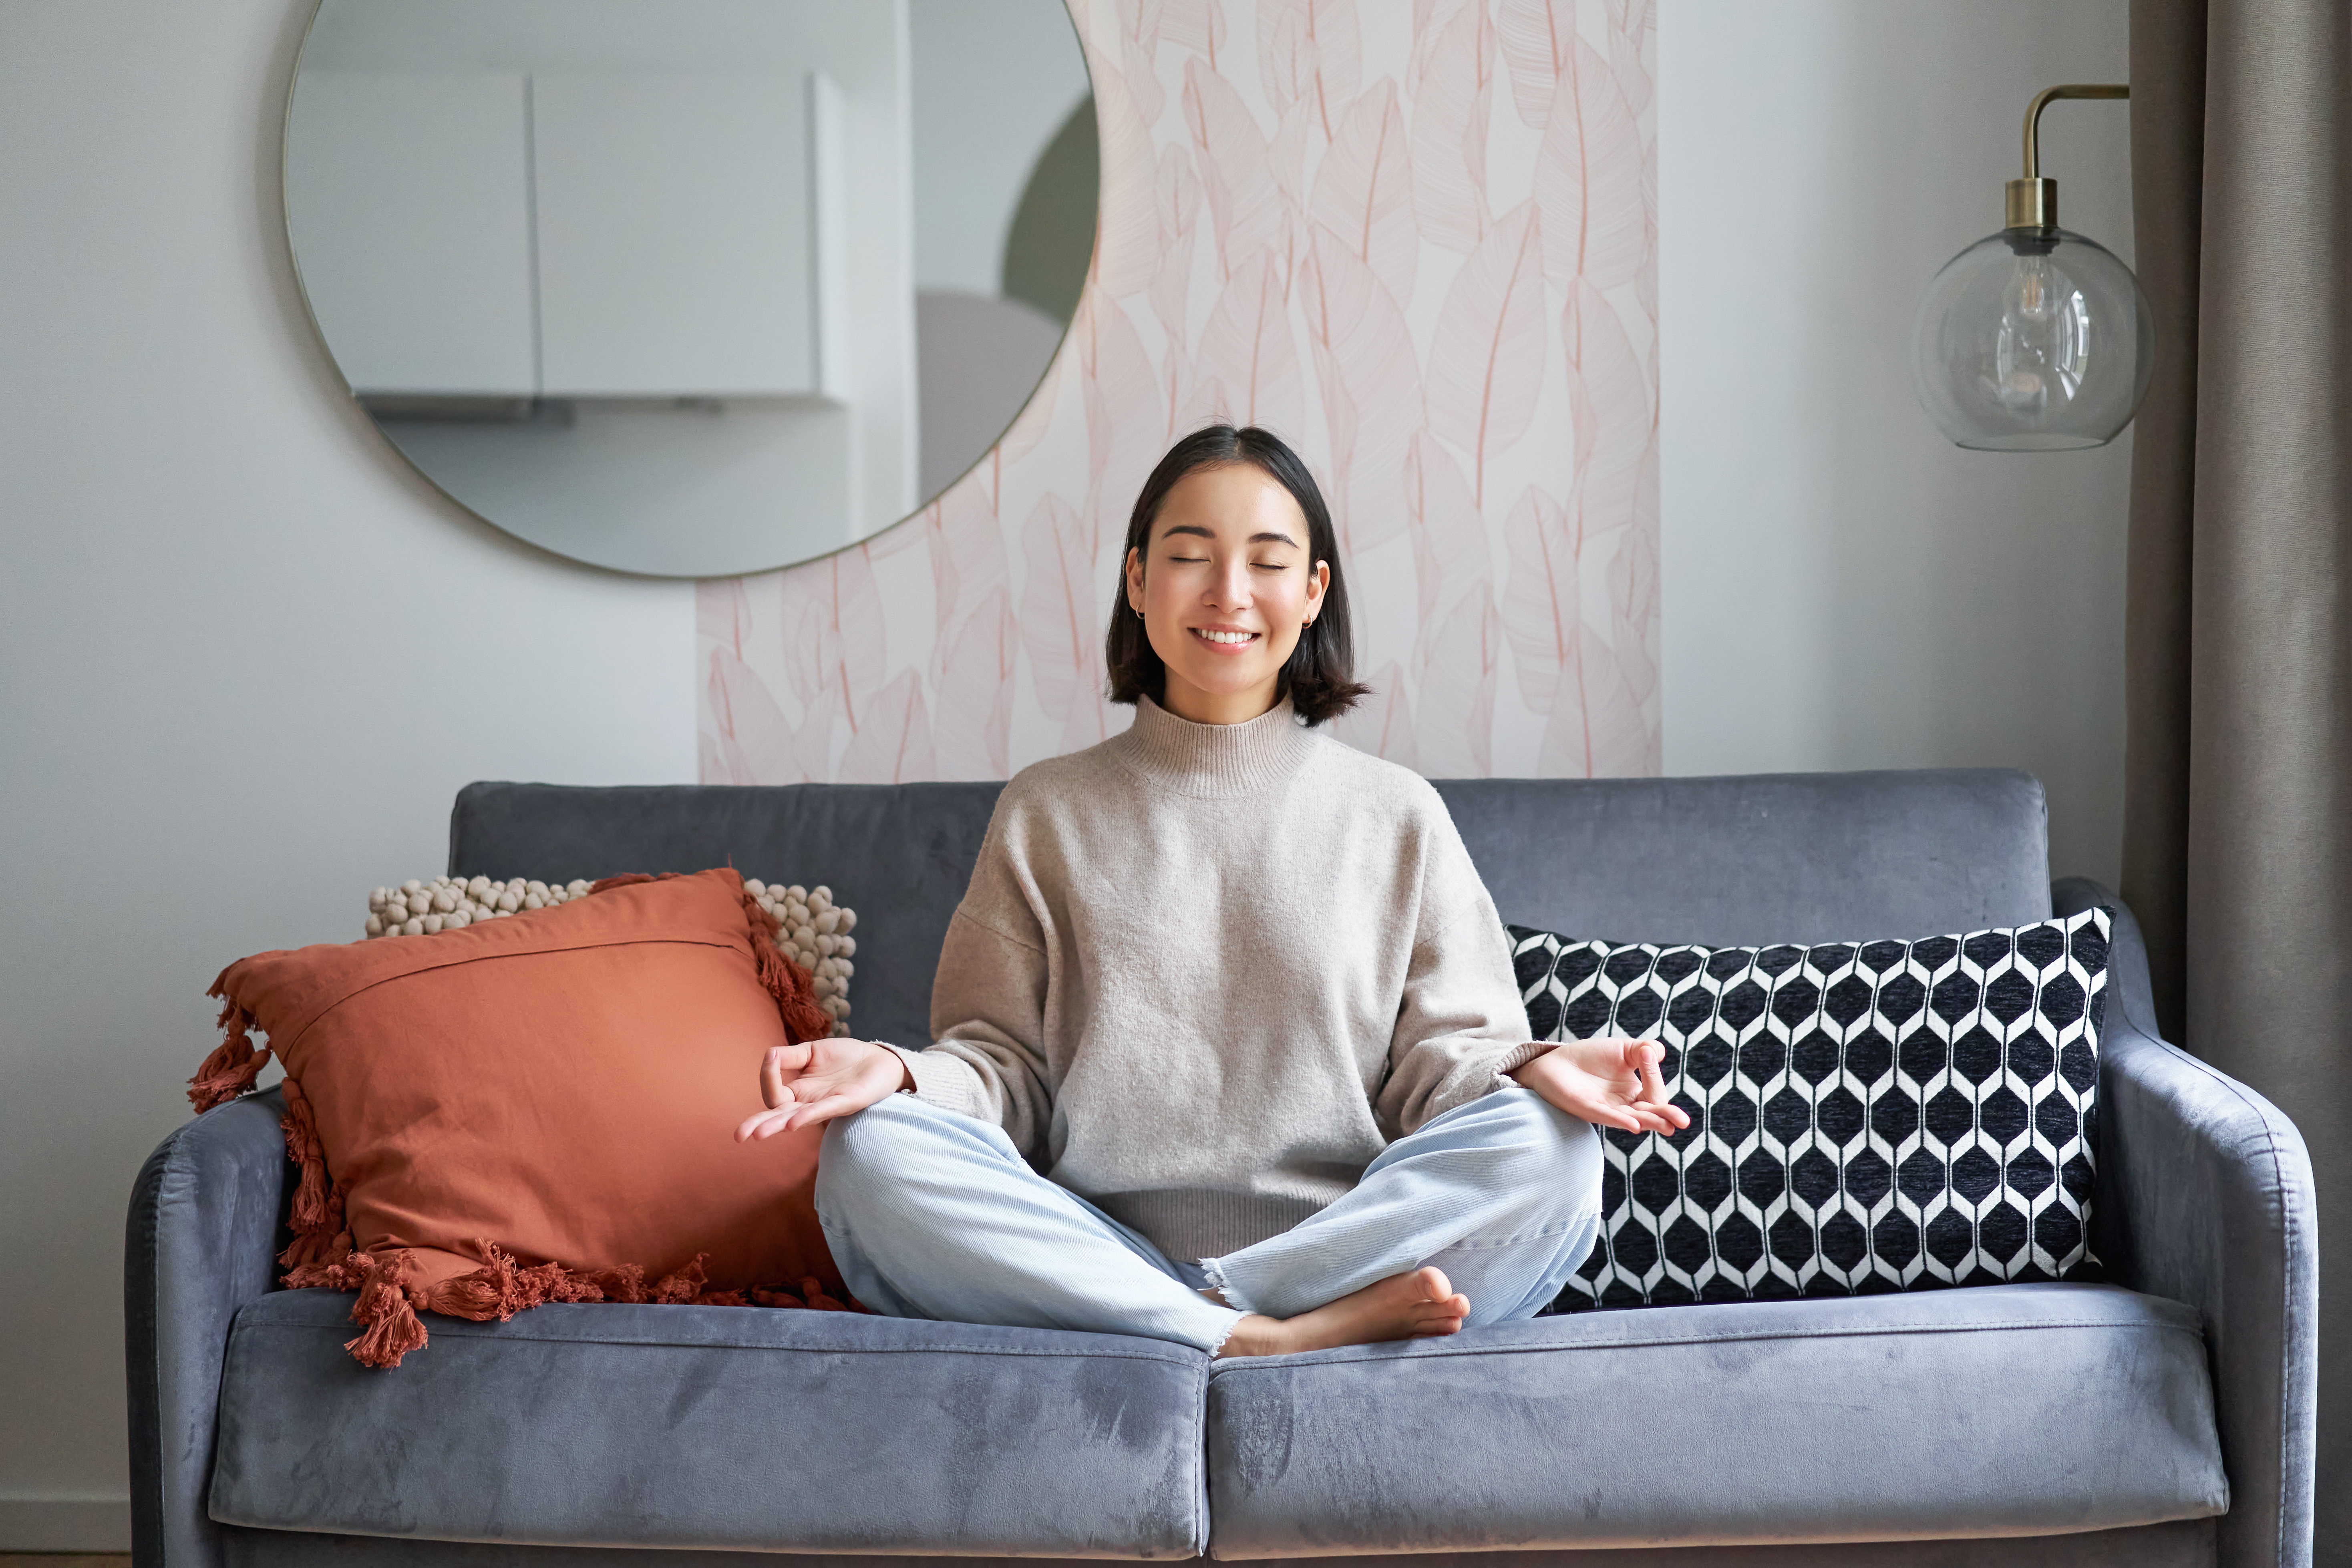 relaxation-patience-smiling-young-asian-woman-cozy-room-sitting-sofa-meditating-doing.jpg